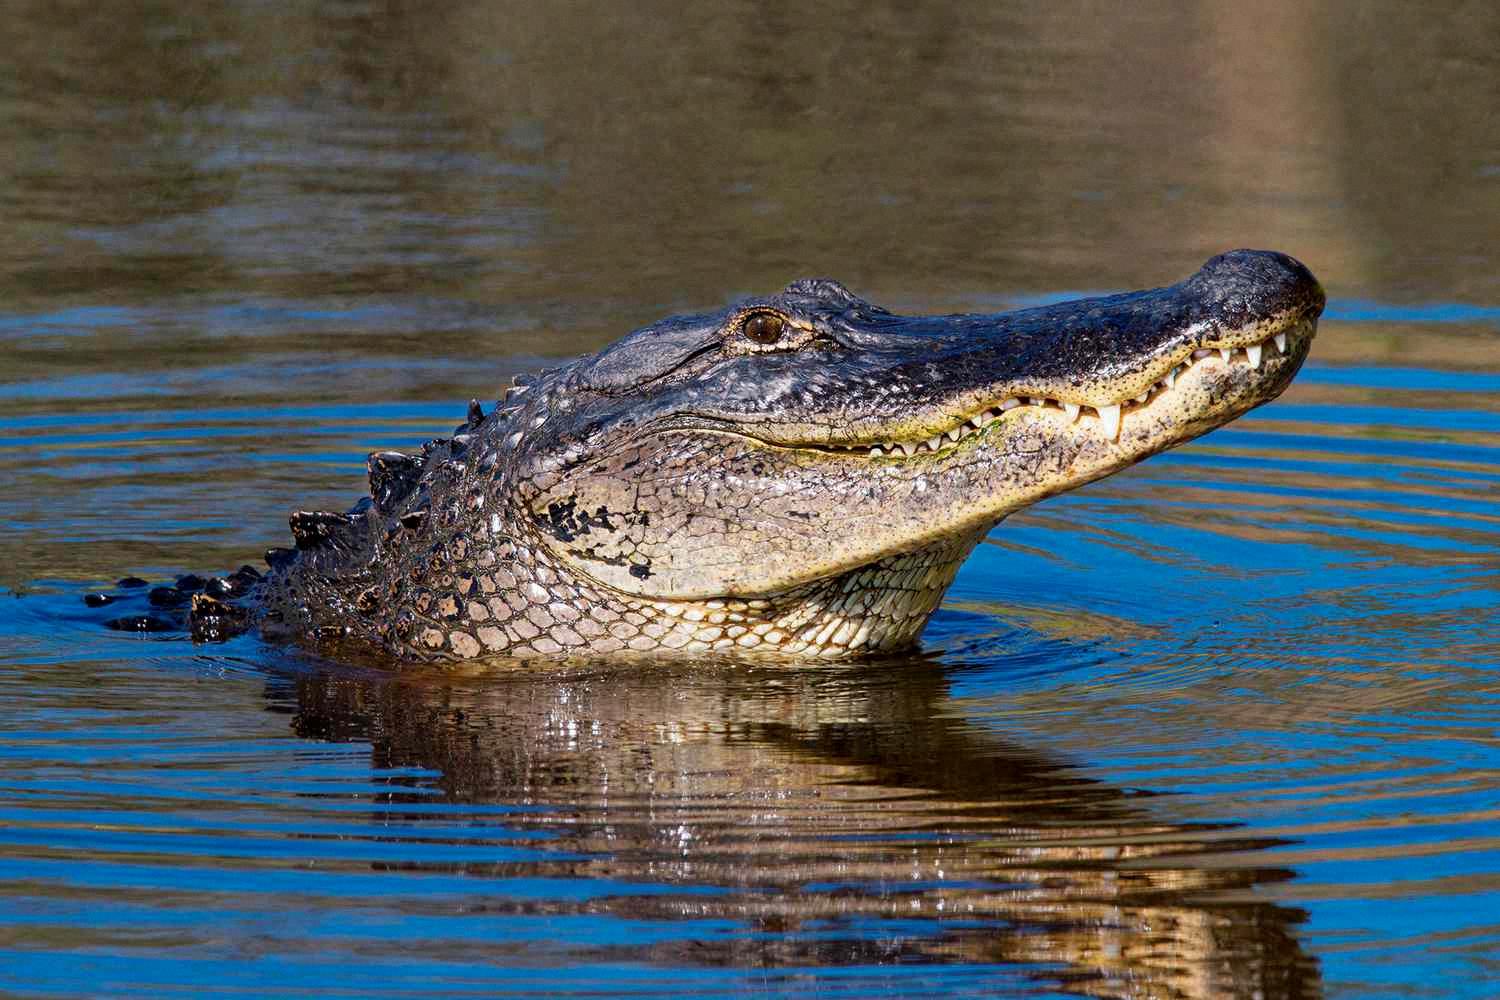 can an alligator live in saltwater